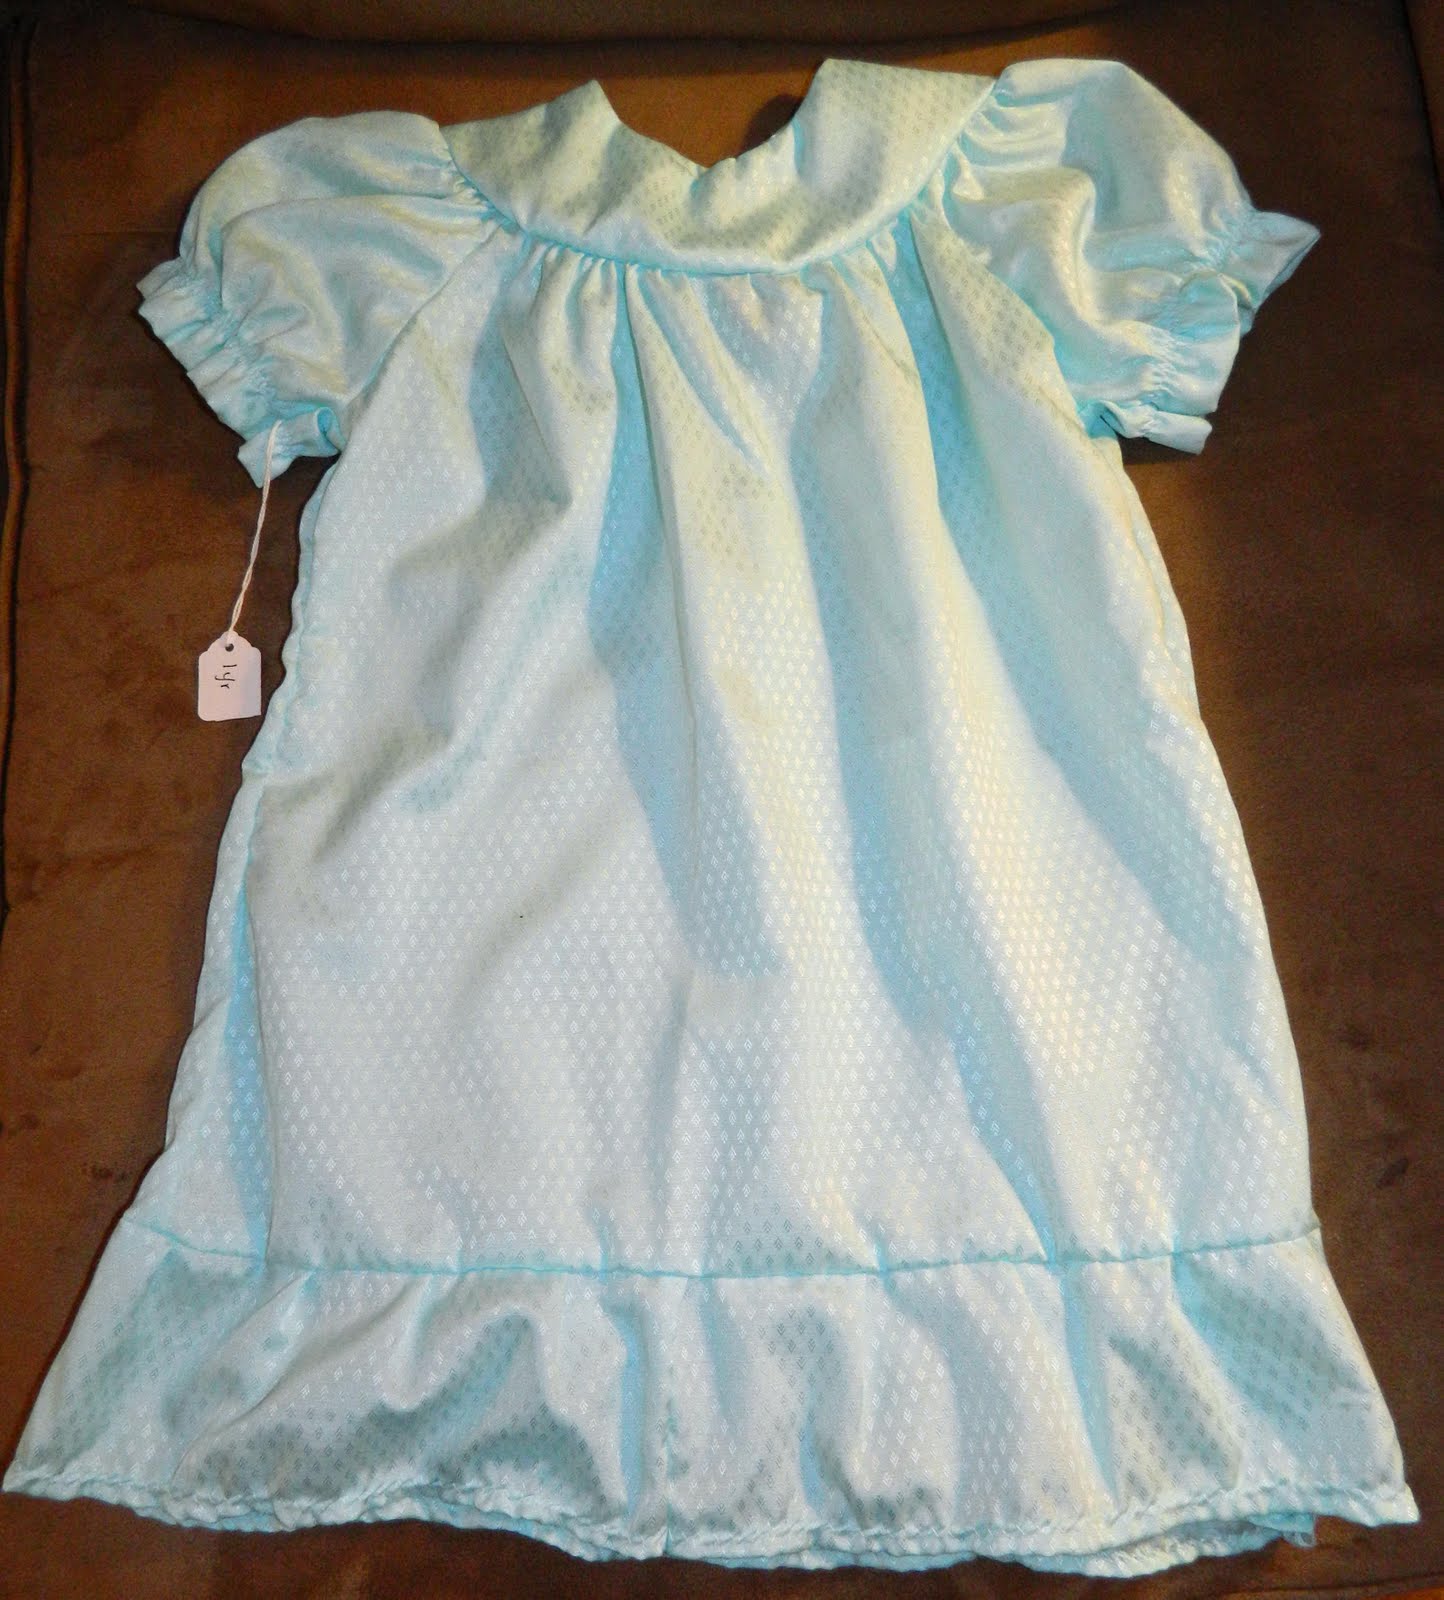 Amy Clipston Books: Win an Authentic Amish Baby Dress & Meadow Tea!